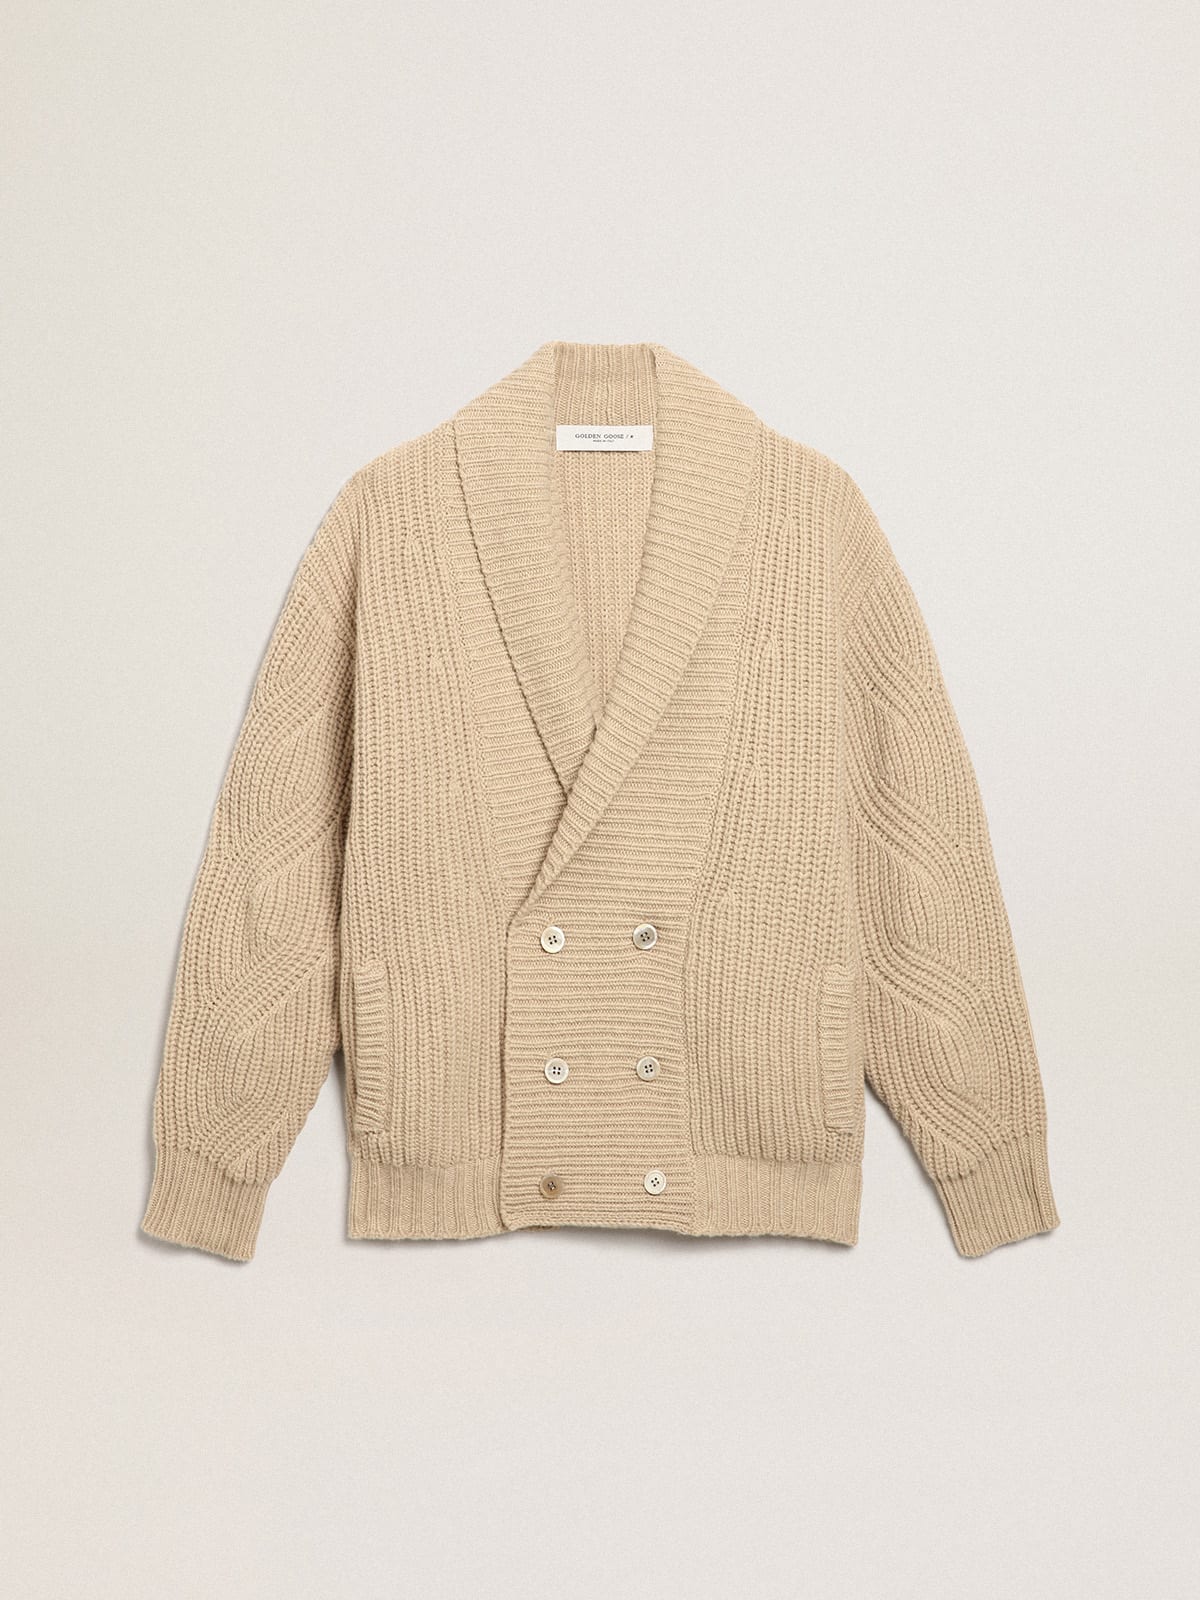 Double-breasted Journey Collection cardigan in beige ribbed wool with tone-on-tone leather patches